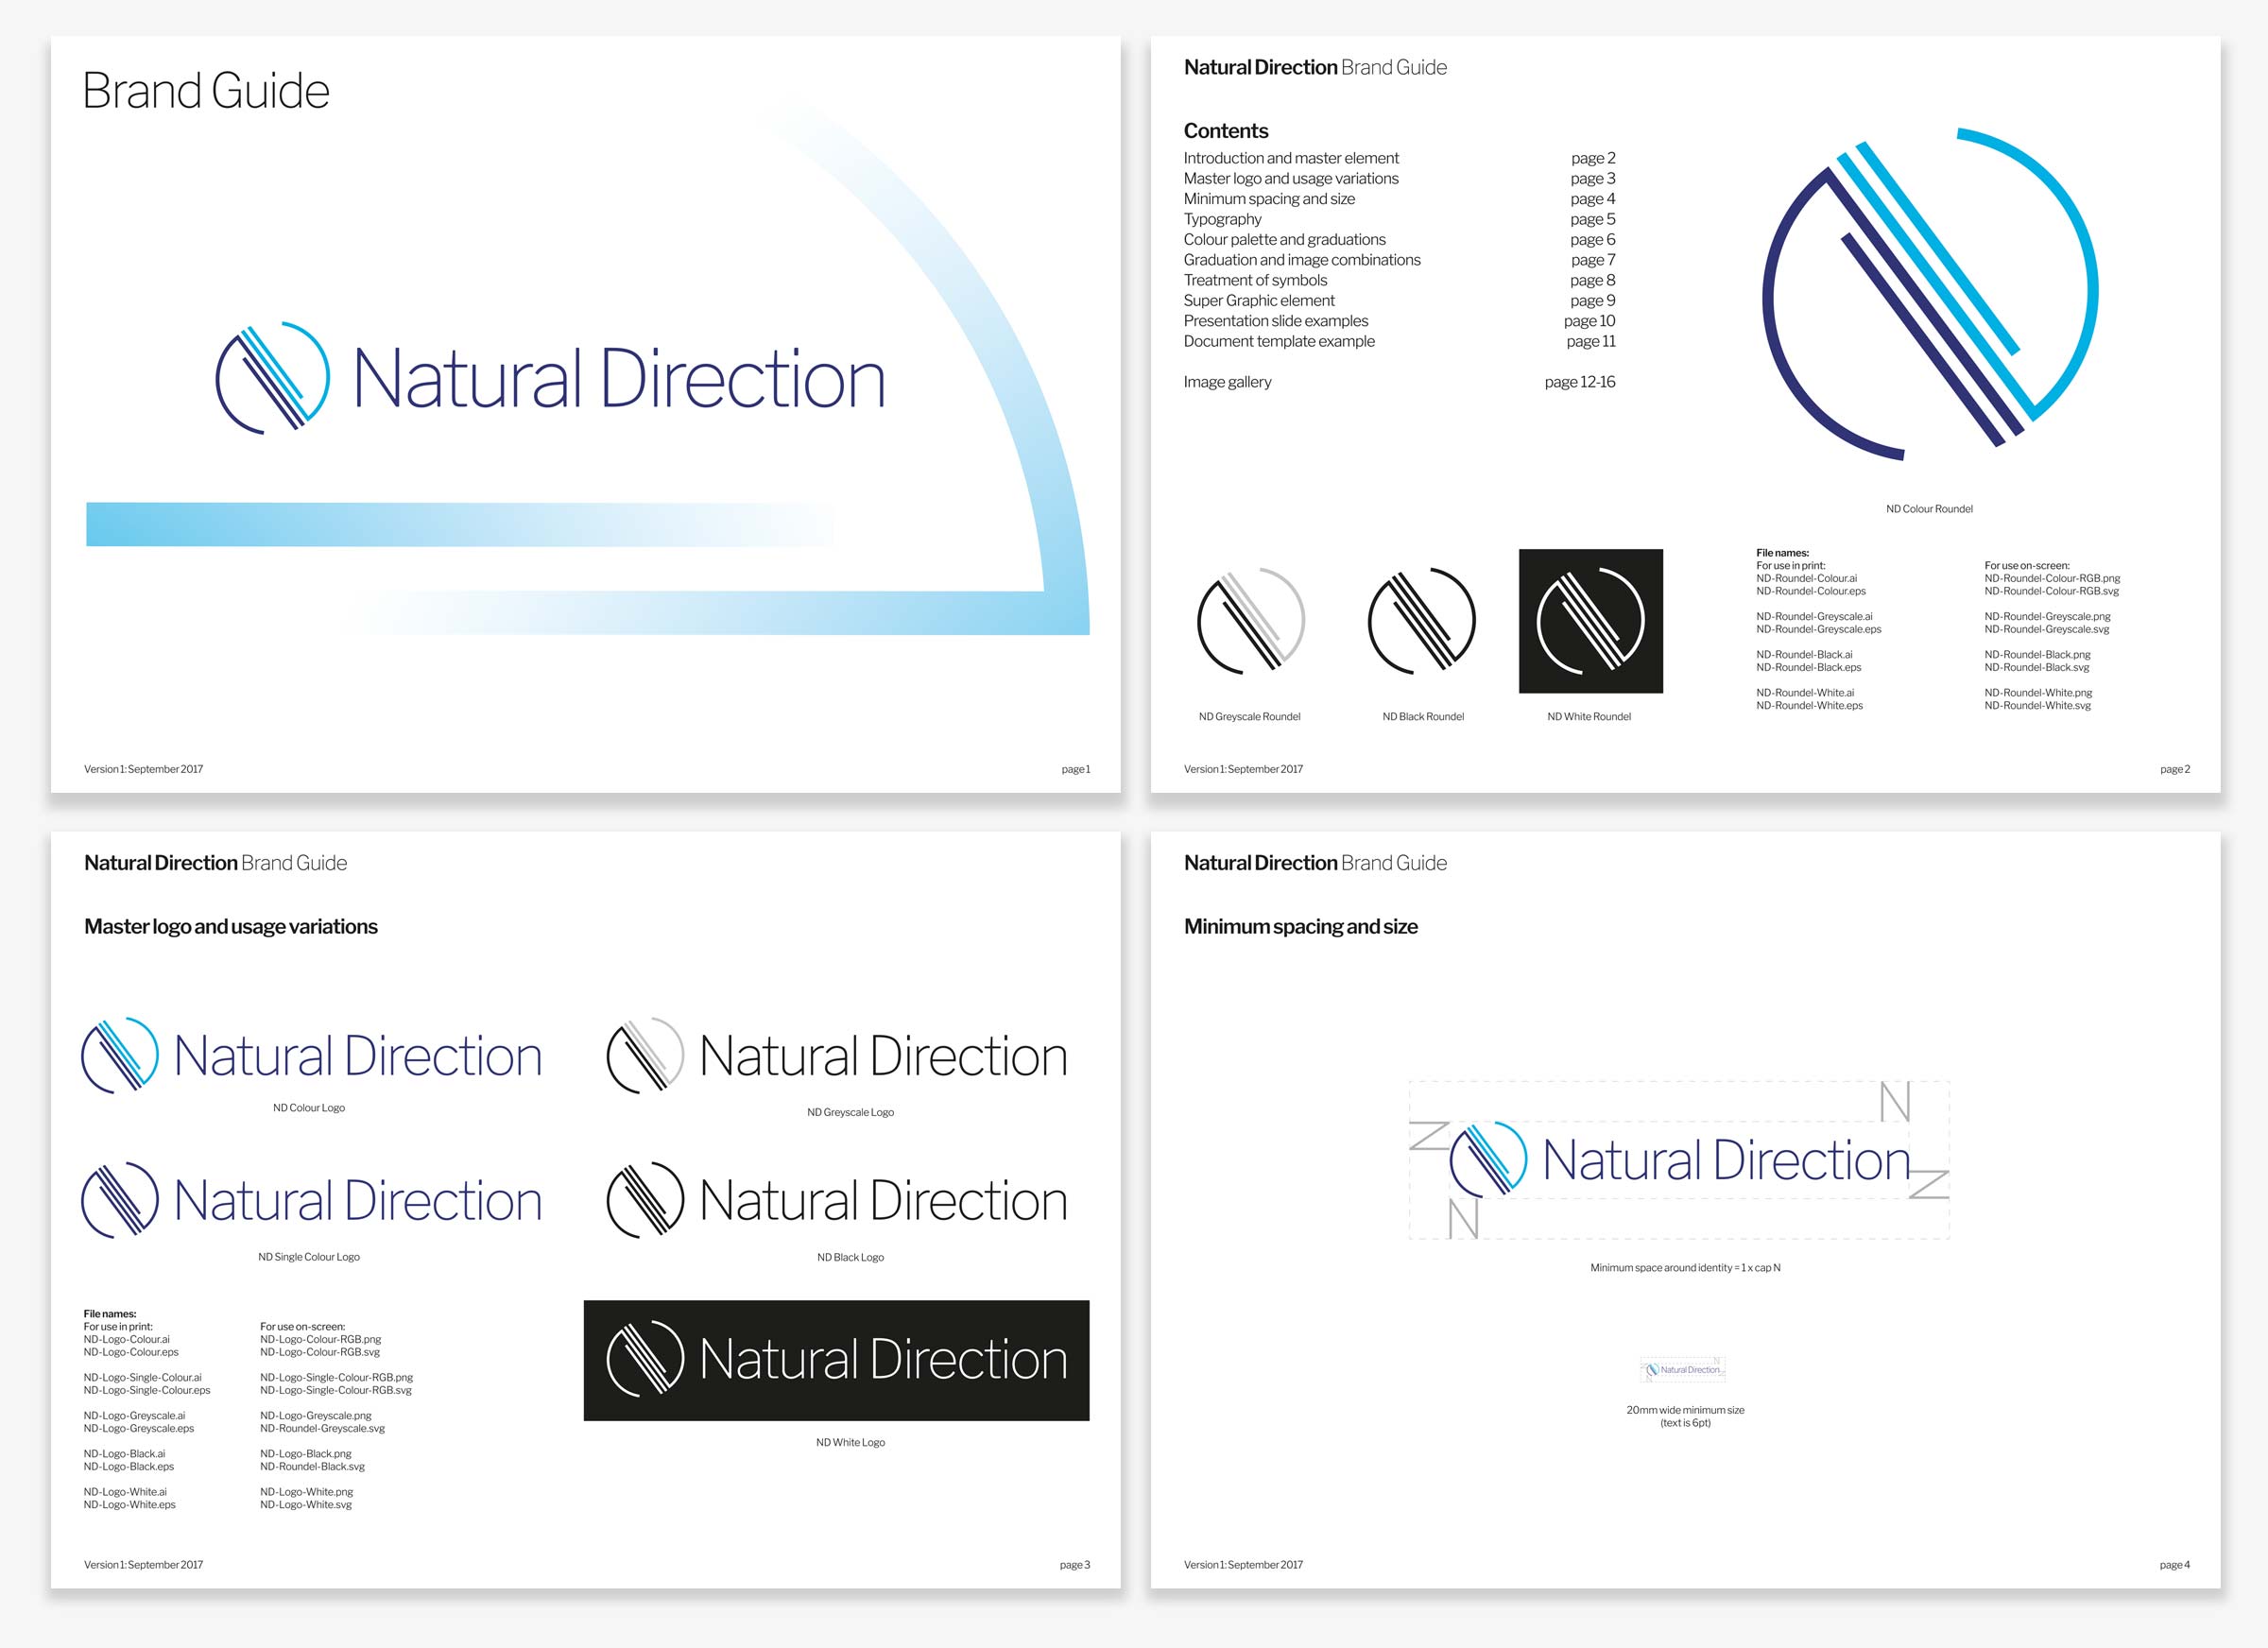 Natural Direction brand guidelines